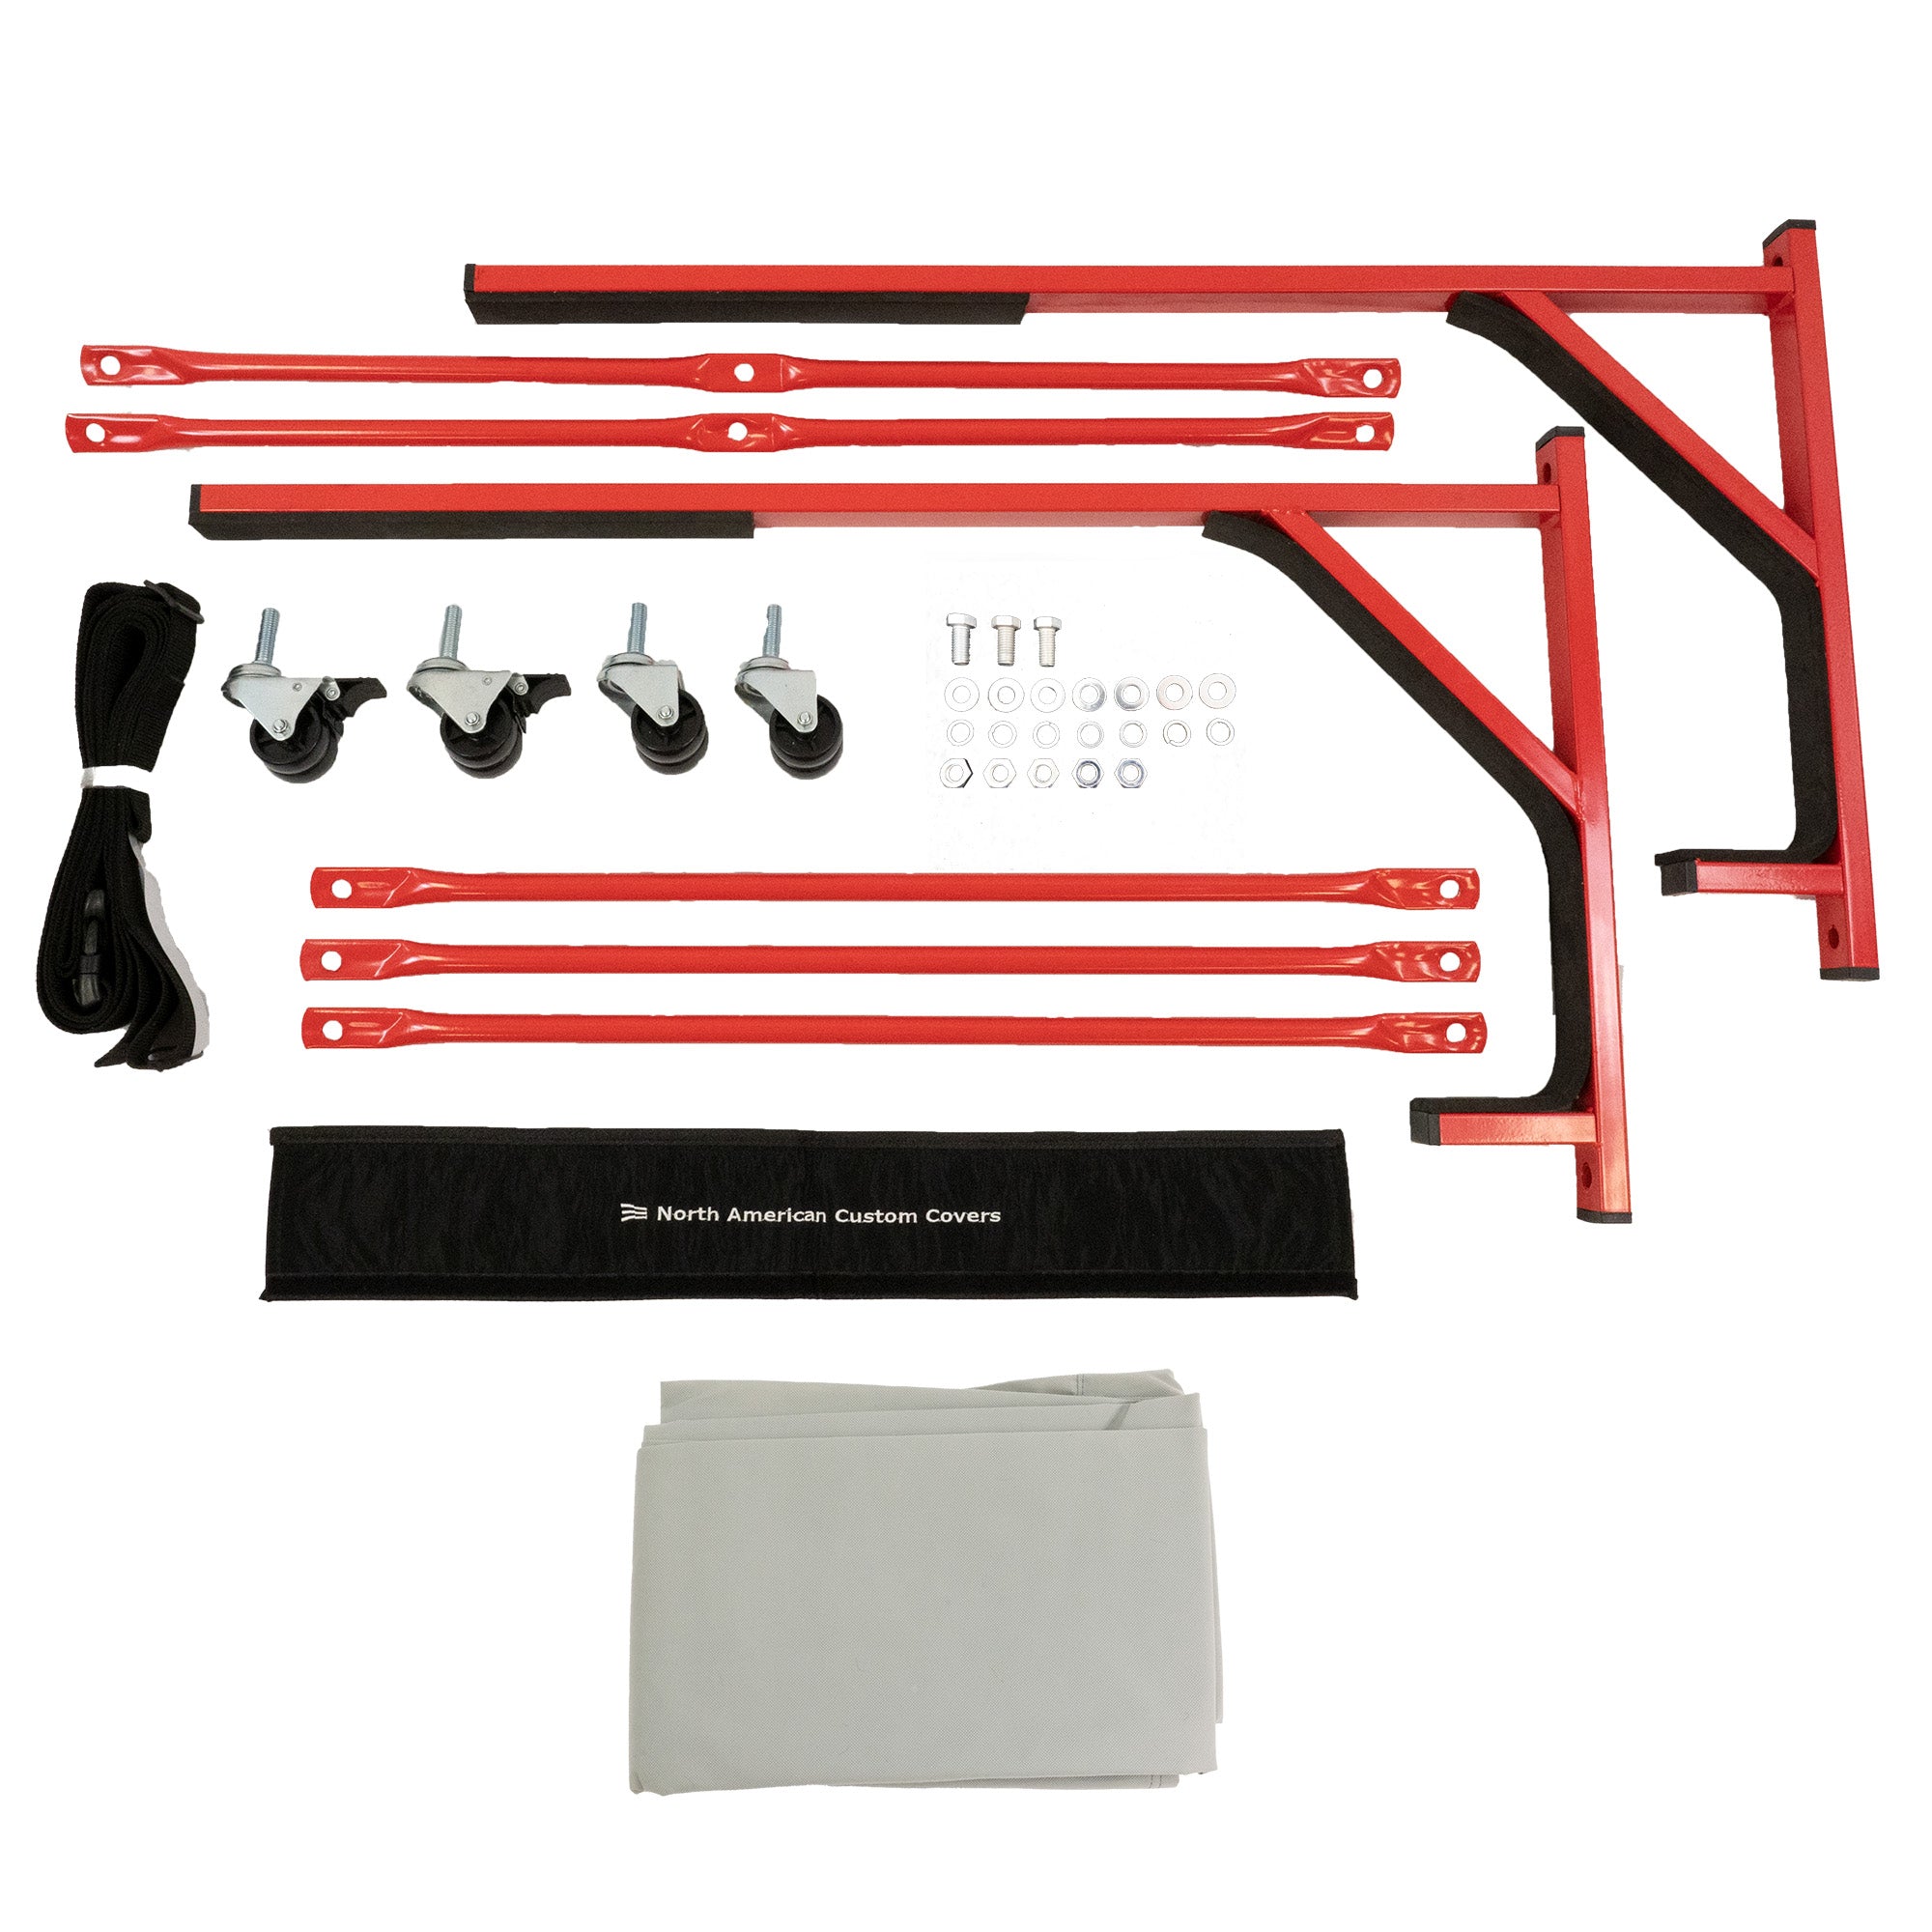 Triumph Spitfire Heavy-duty Hardtop Stand Trolley Cart Rack (Red) with Securing Harness and Hard Top Dust Cover (050R)